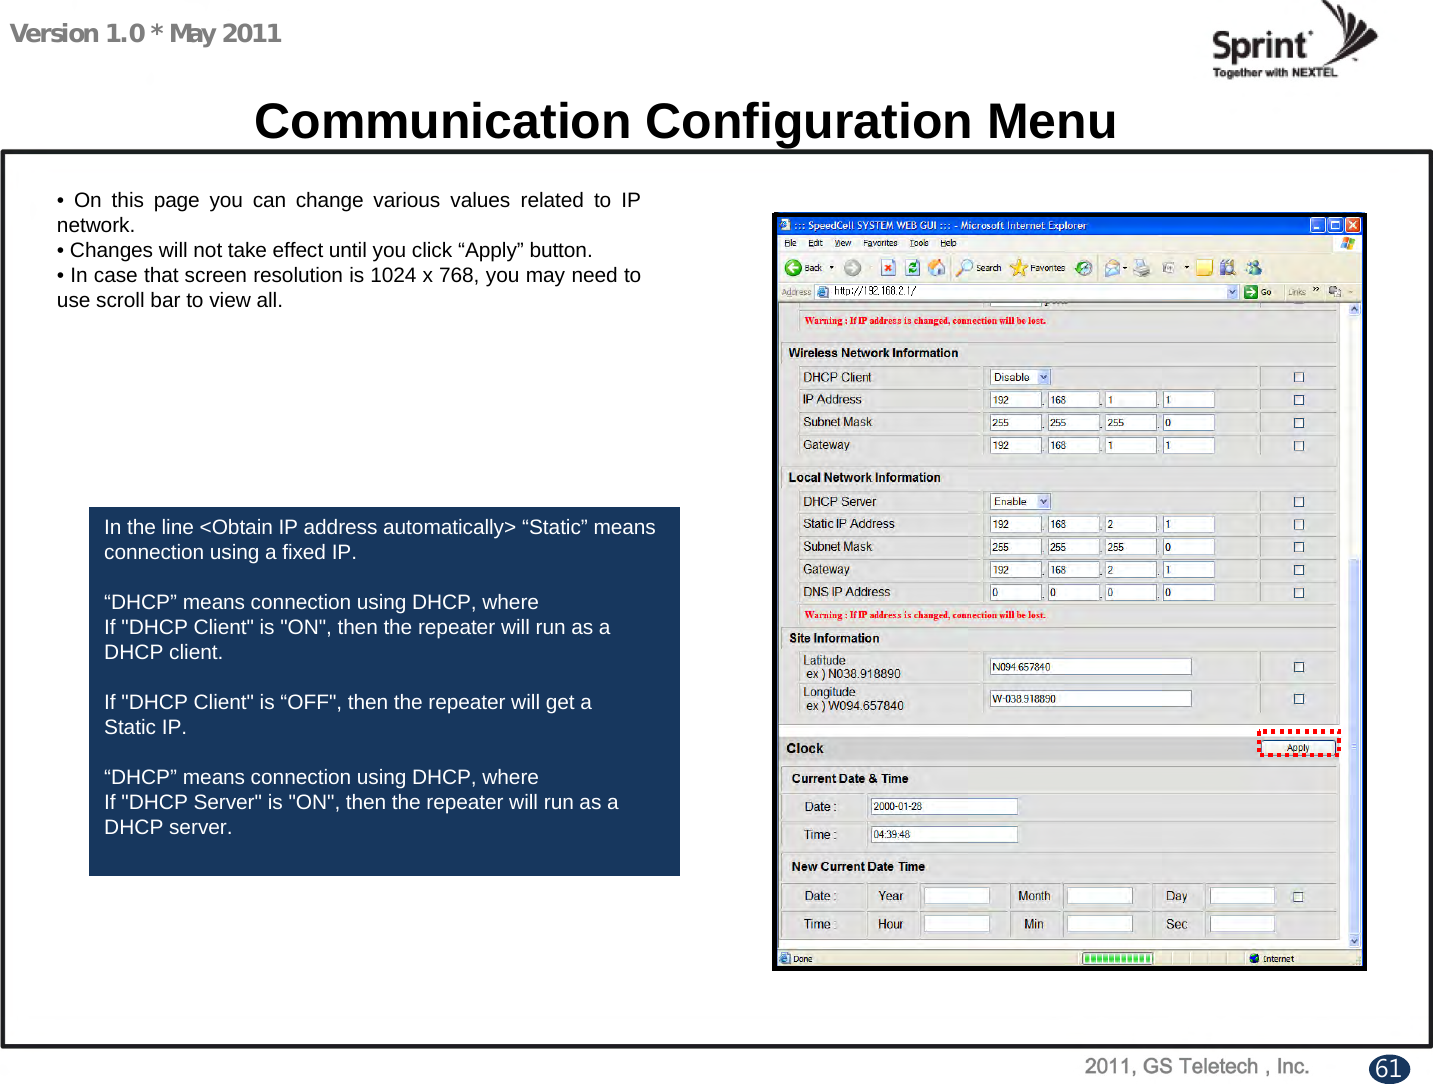 Version 1.0 * May 2011Communication Configuration Menu• On this page you can change various values related to IP network.• Changes will not take effect until you click “Apply” button.• In case that screen resolution is 1024 x 768, you may need to use scroll bar to view all.In the line &lt;Obtain IP address automatically&gt; “Static” means connection using a fixed IP.“DHCP” means connection using DHCP, whereIf &quot;DHCP Client&quot; is &quot;ON&quot;, then the repeater will run as aDHCP client.If &quot;DHCP Client&quot; is “OFF&quot;, then the repeater will get aStatic IP.“DHCP” means connection using DHCP, whereIf &quot;DHCP Server&quot; is &quot;ON&quot;, then the repeater will run as aDHCP server.61